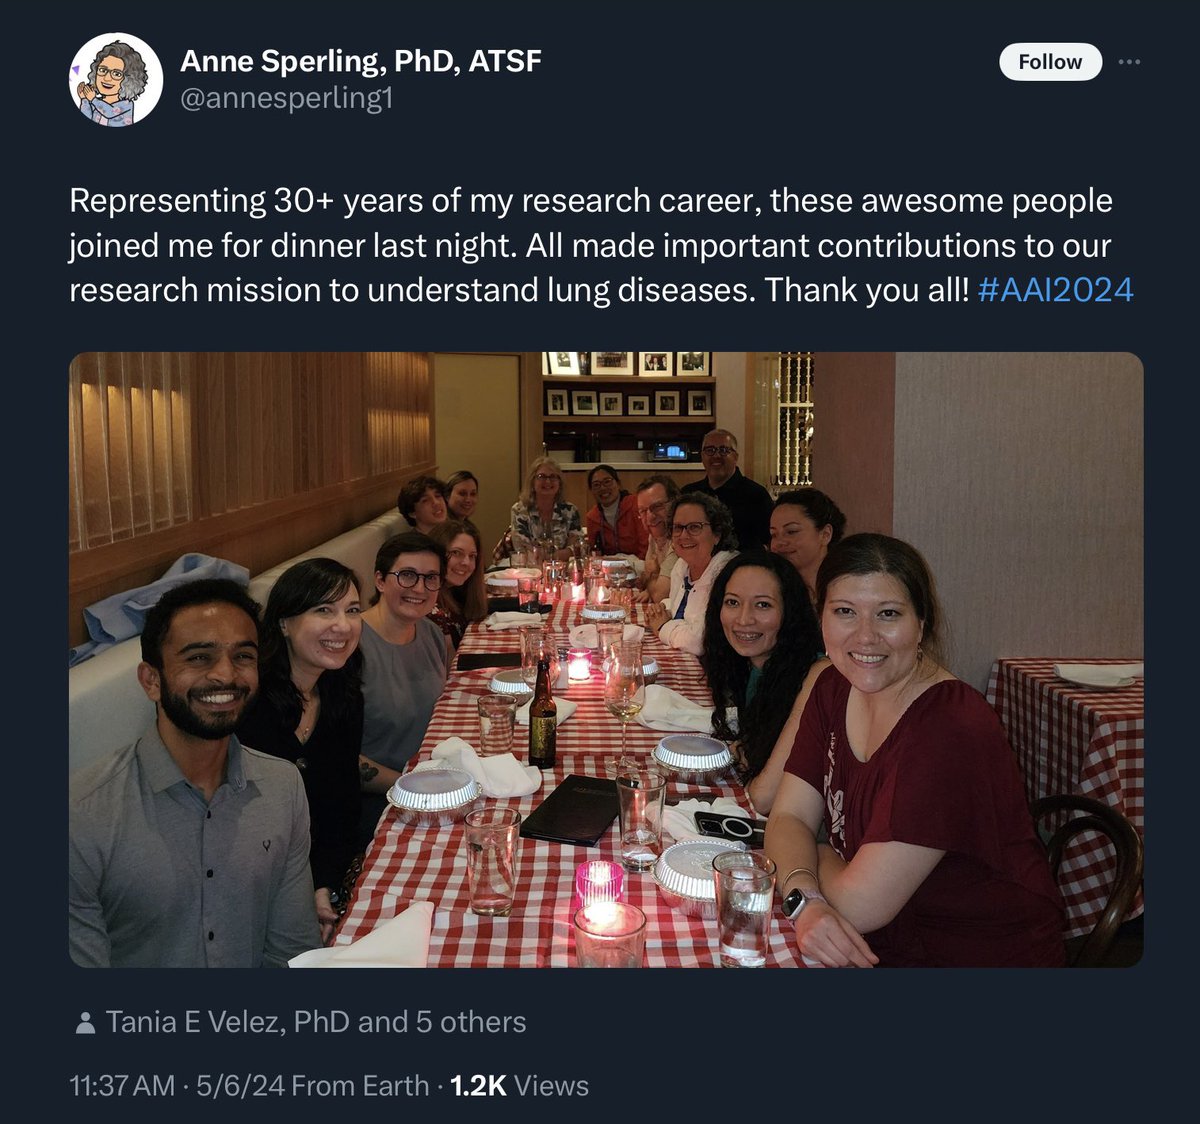 Our wonderful immunologists…siding with the virus. #Sarcasm #AAI2024